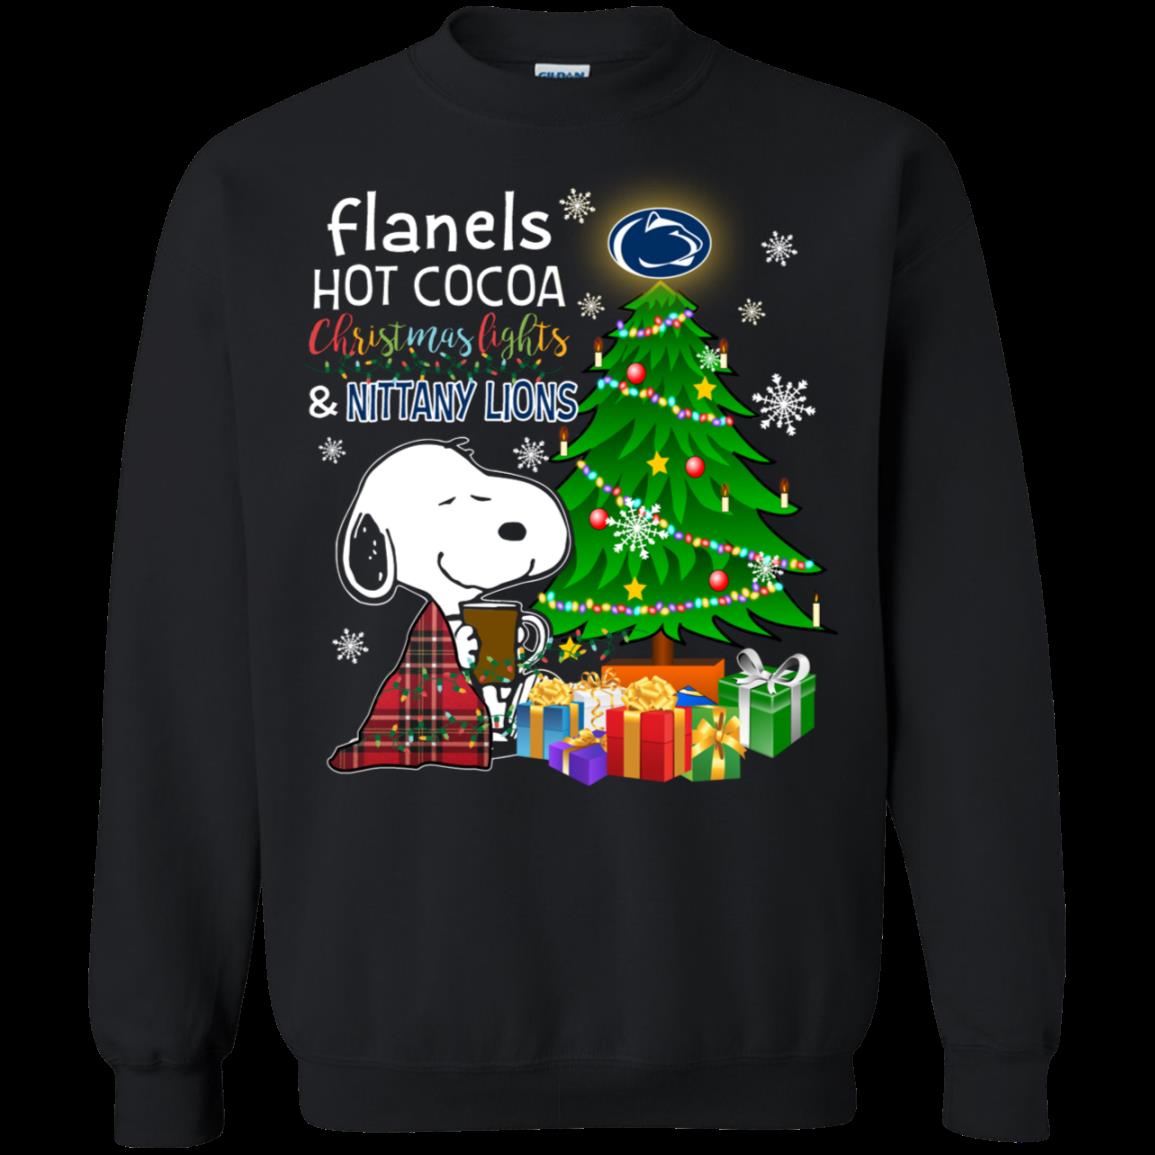 Penn State Nittany Lions Snoopy Ugly Christmas Sweater Flanels Hot Cocoa